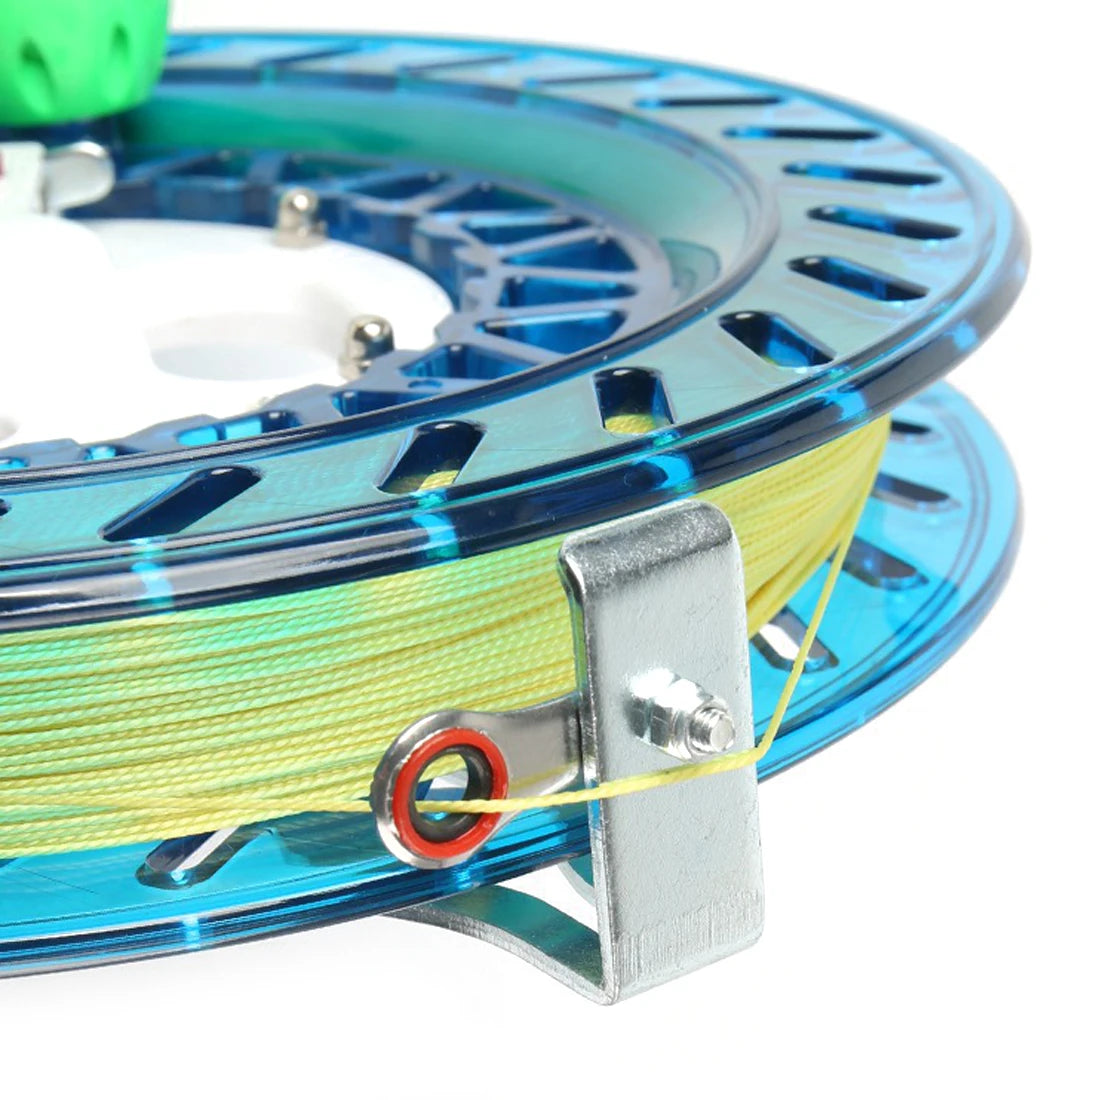 High Quality 15cm~26cm Kite Reel & Line Set with Ball Bearing and ABS Plastic - ToylandEU